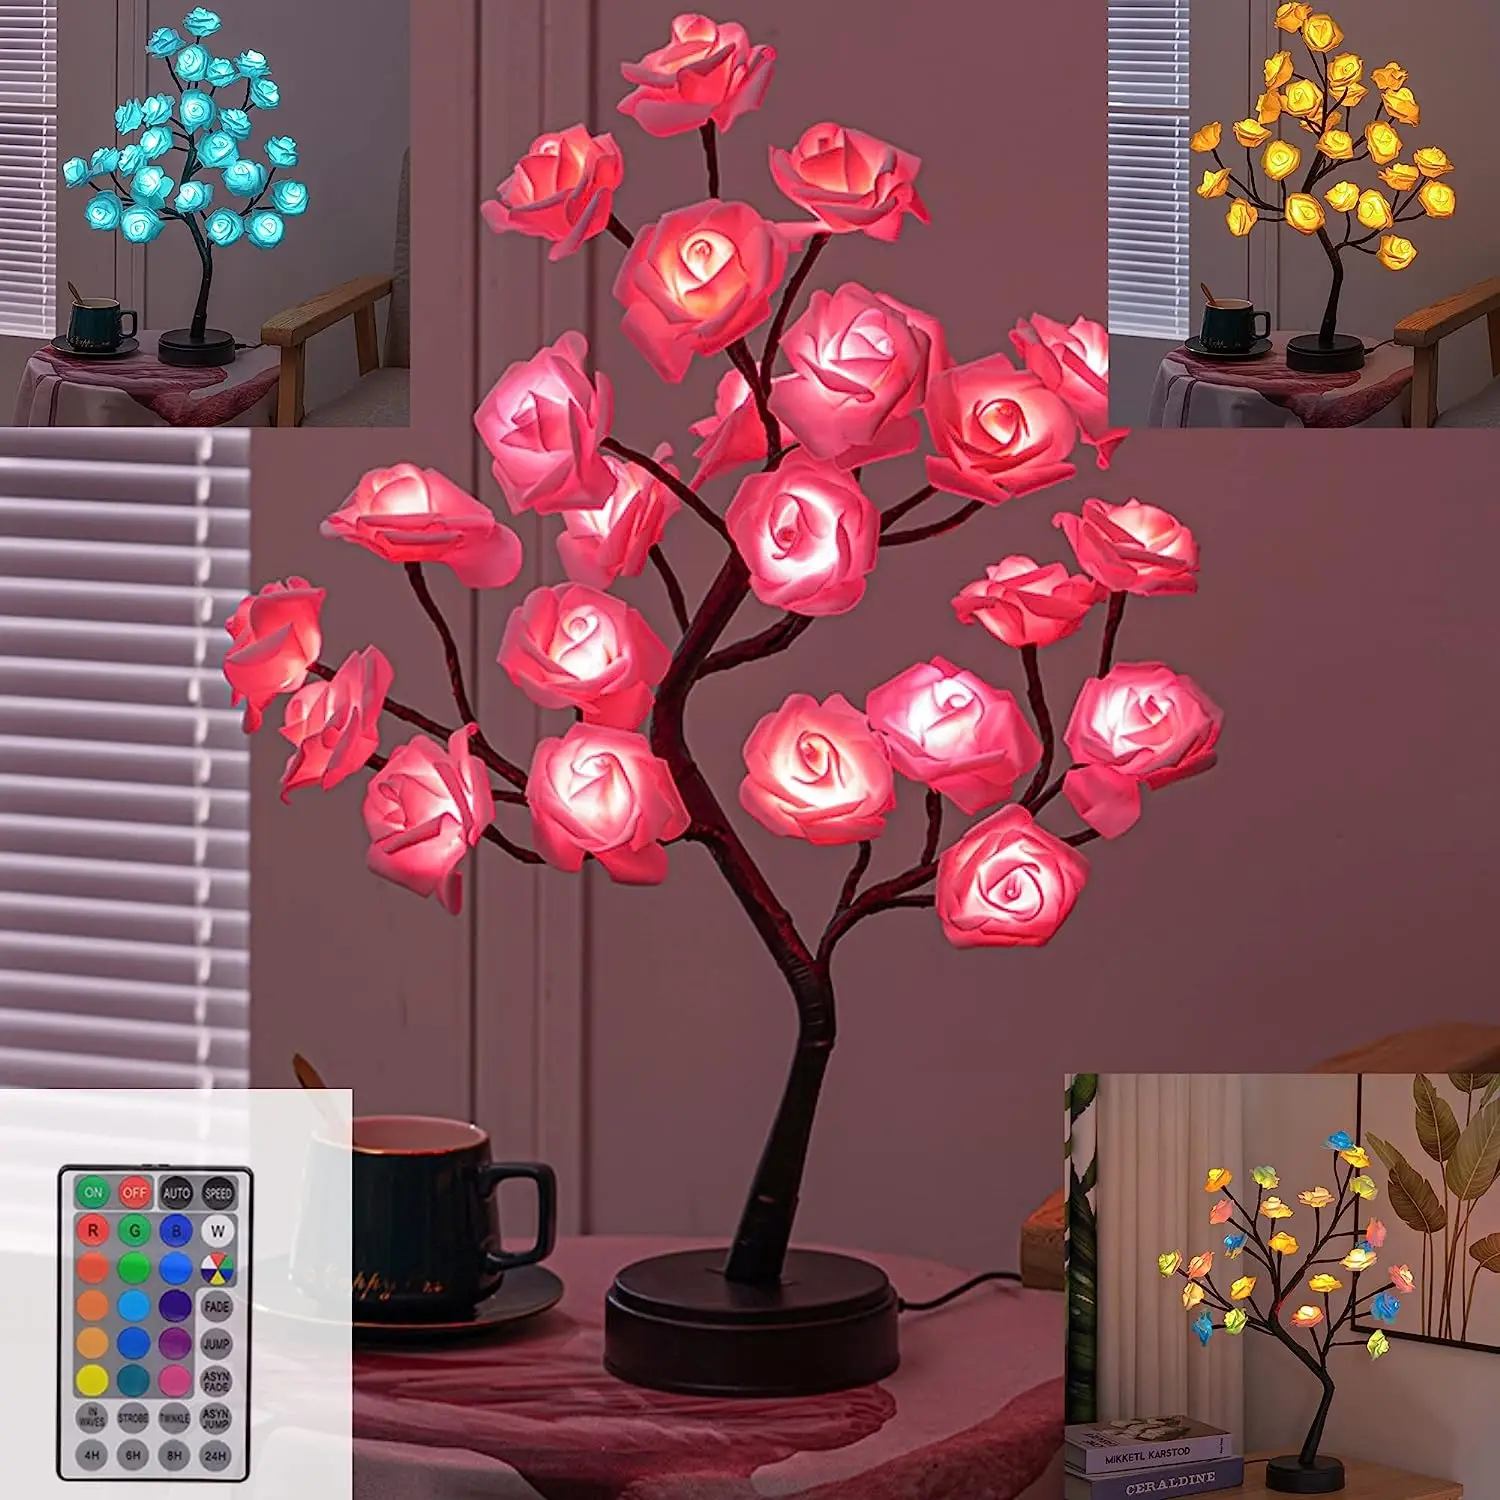 RGB Rose Flower Tree Lights 24LED USB Battery Table Lamp Fairy Night Light Home Party Christmas Wedding Bedroom Decoration Gift led neon night light sign night lamp xmas party wedding decoration home gift flamingo cactus usb battery operation neon lamp